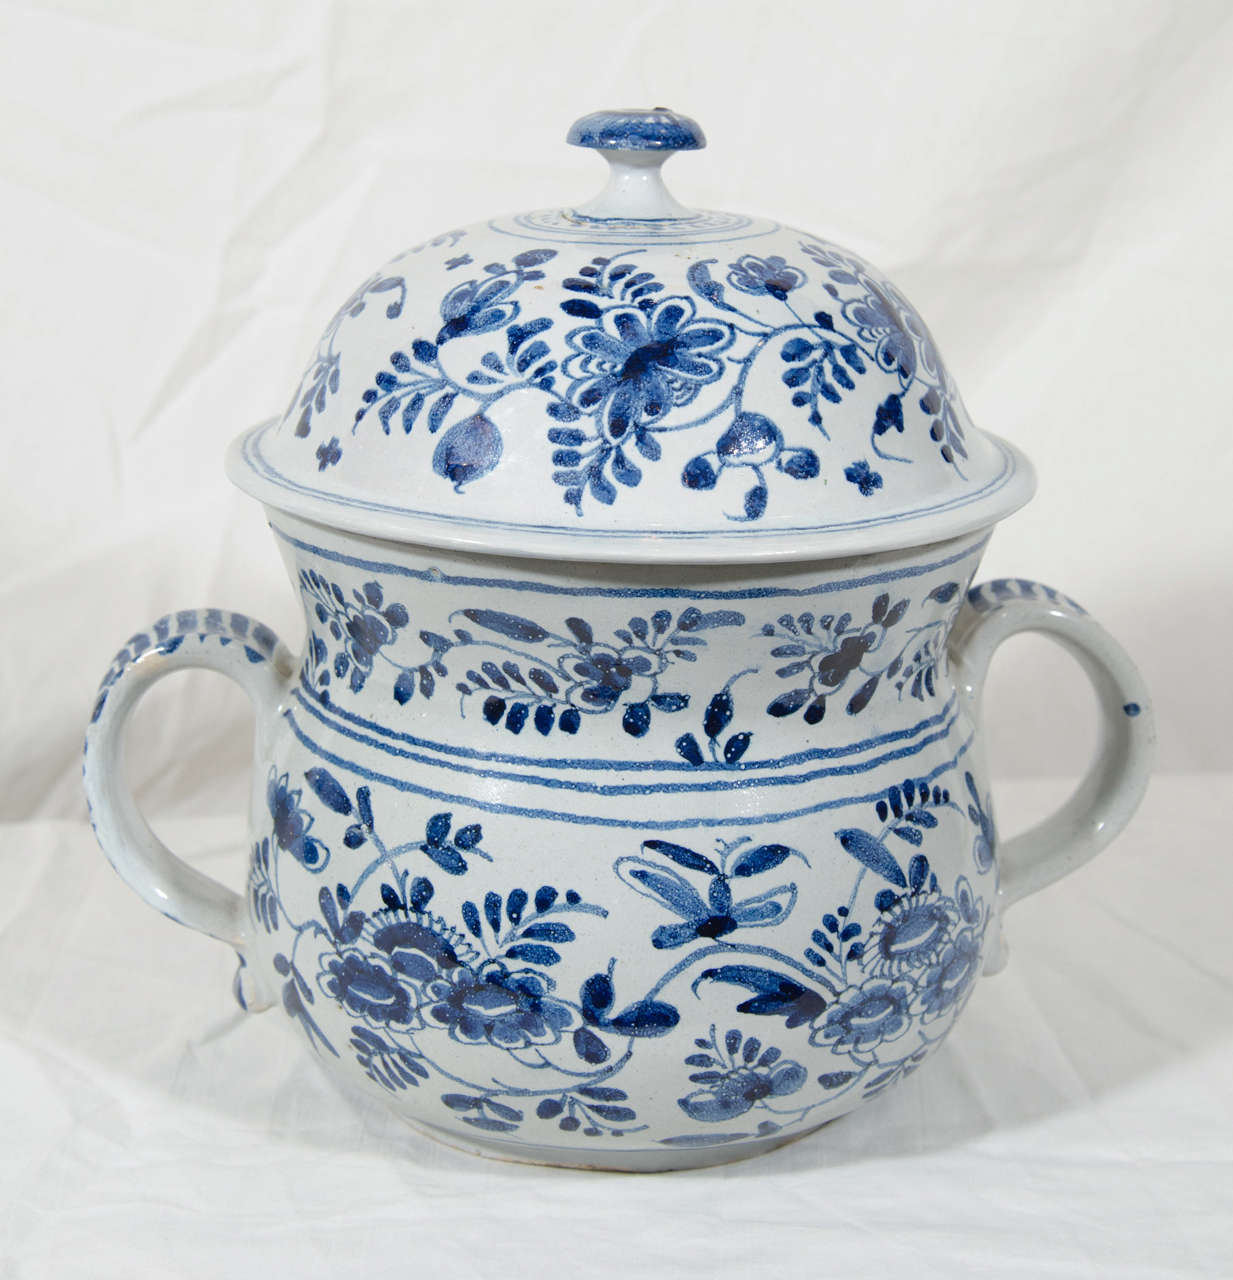 A blue and white Delft posset pot and cover decorated in underglaze blue with bands of scrolling flowers. The cylindrical body with a flat shoulder and a short wide neck, the curved spout and strap handles with dashes in blue, and a domed cover with